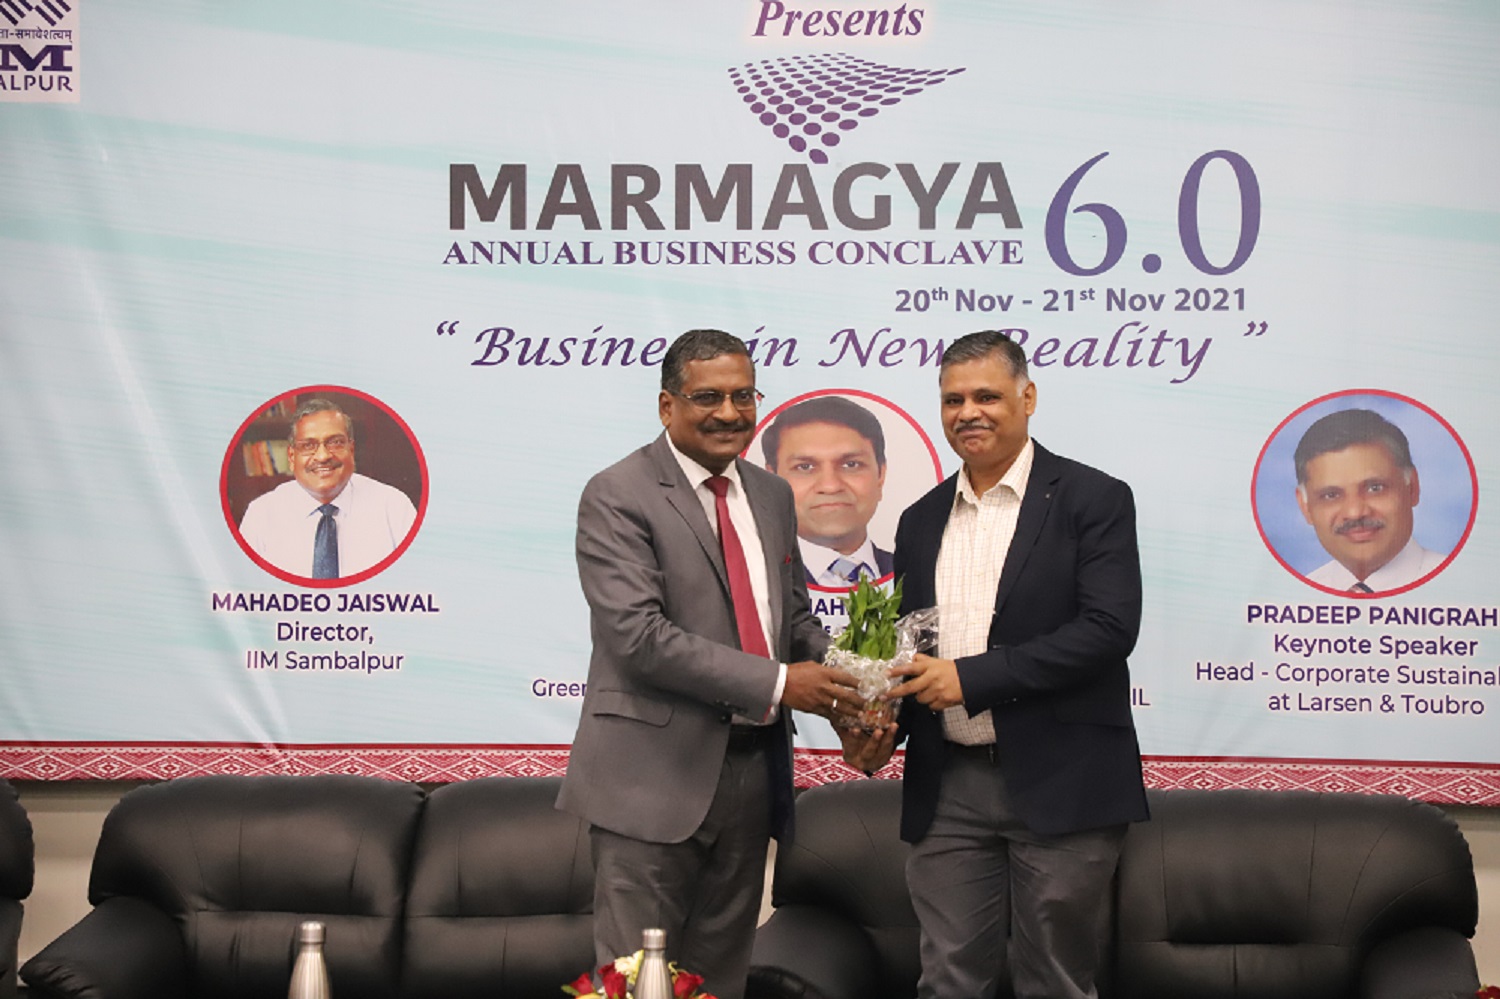 iim-sambalpur-organizes-the-6th-edition-of-the-annual-business-conclave-marmagya-6-0